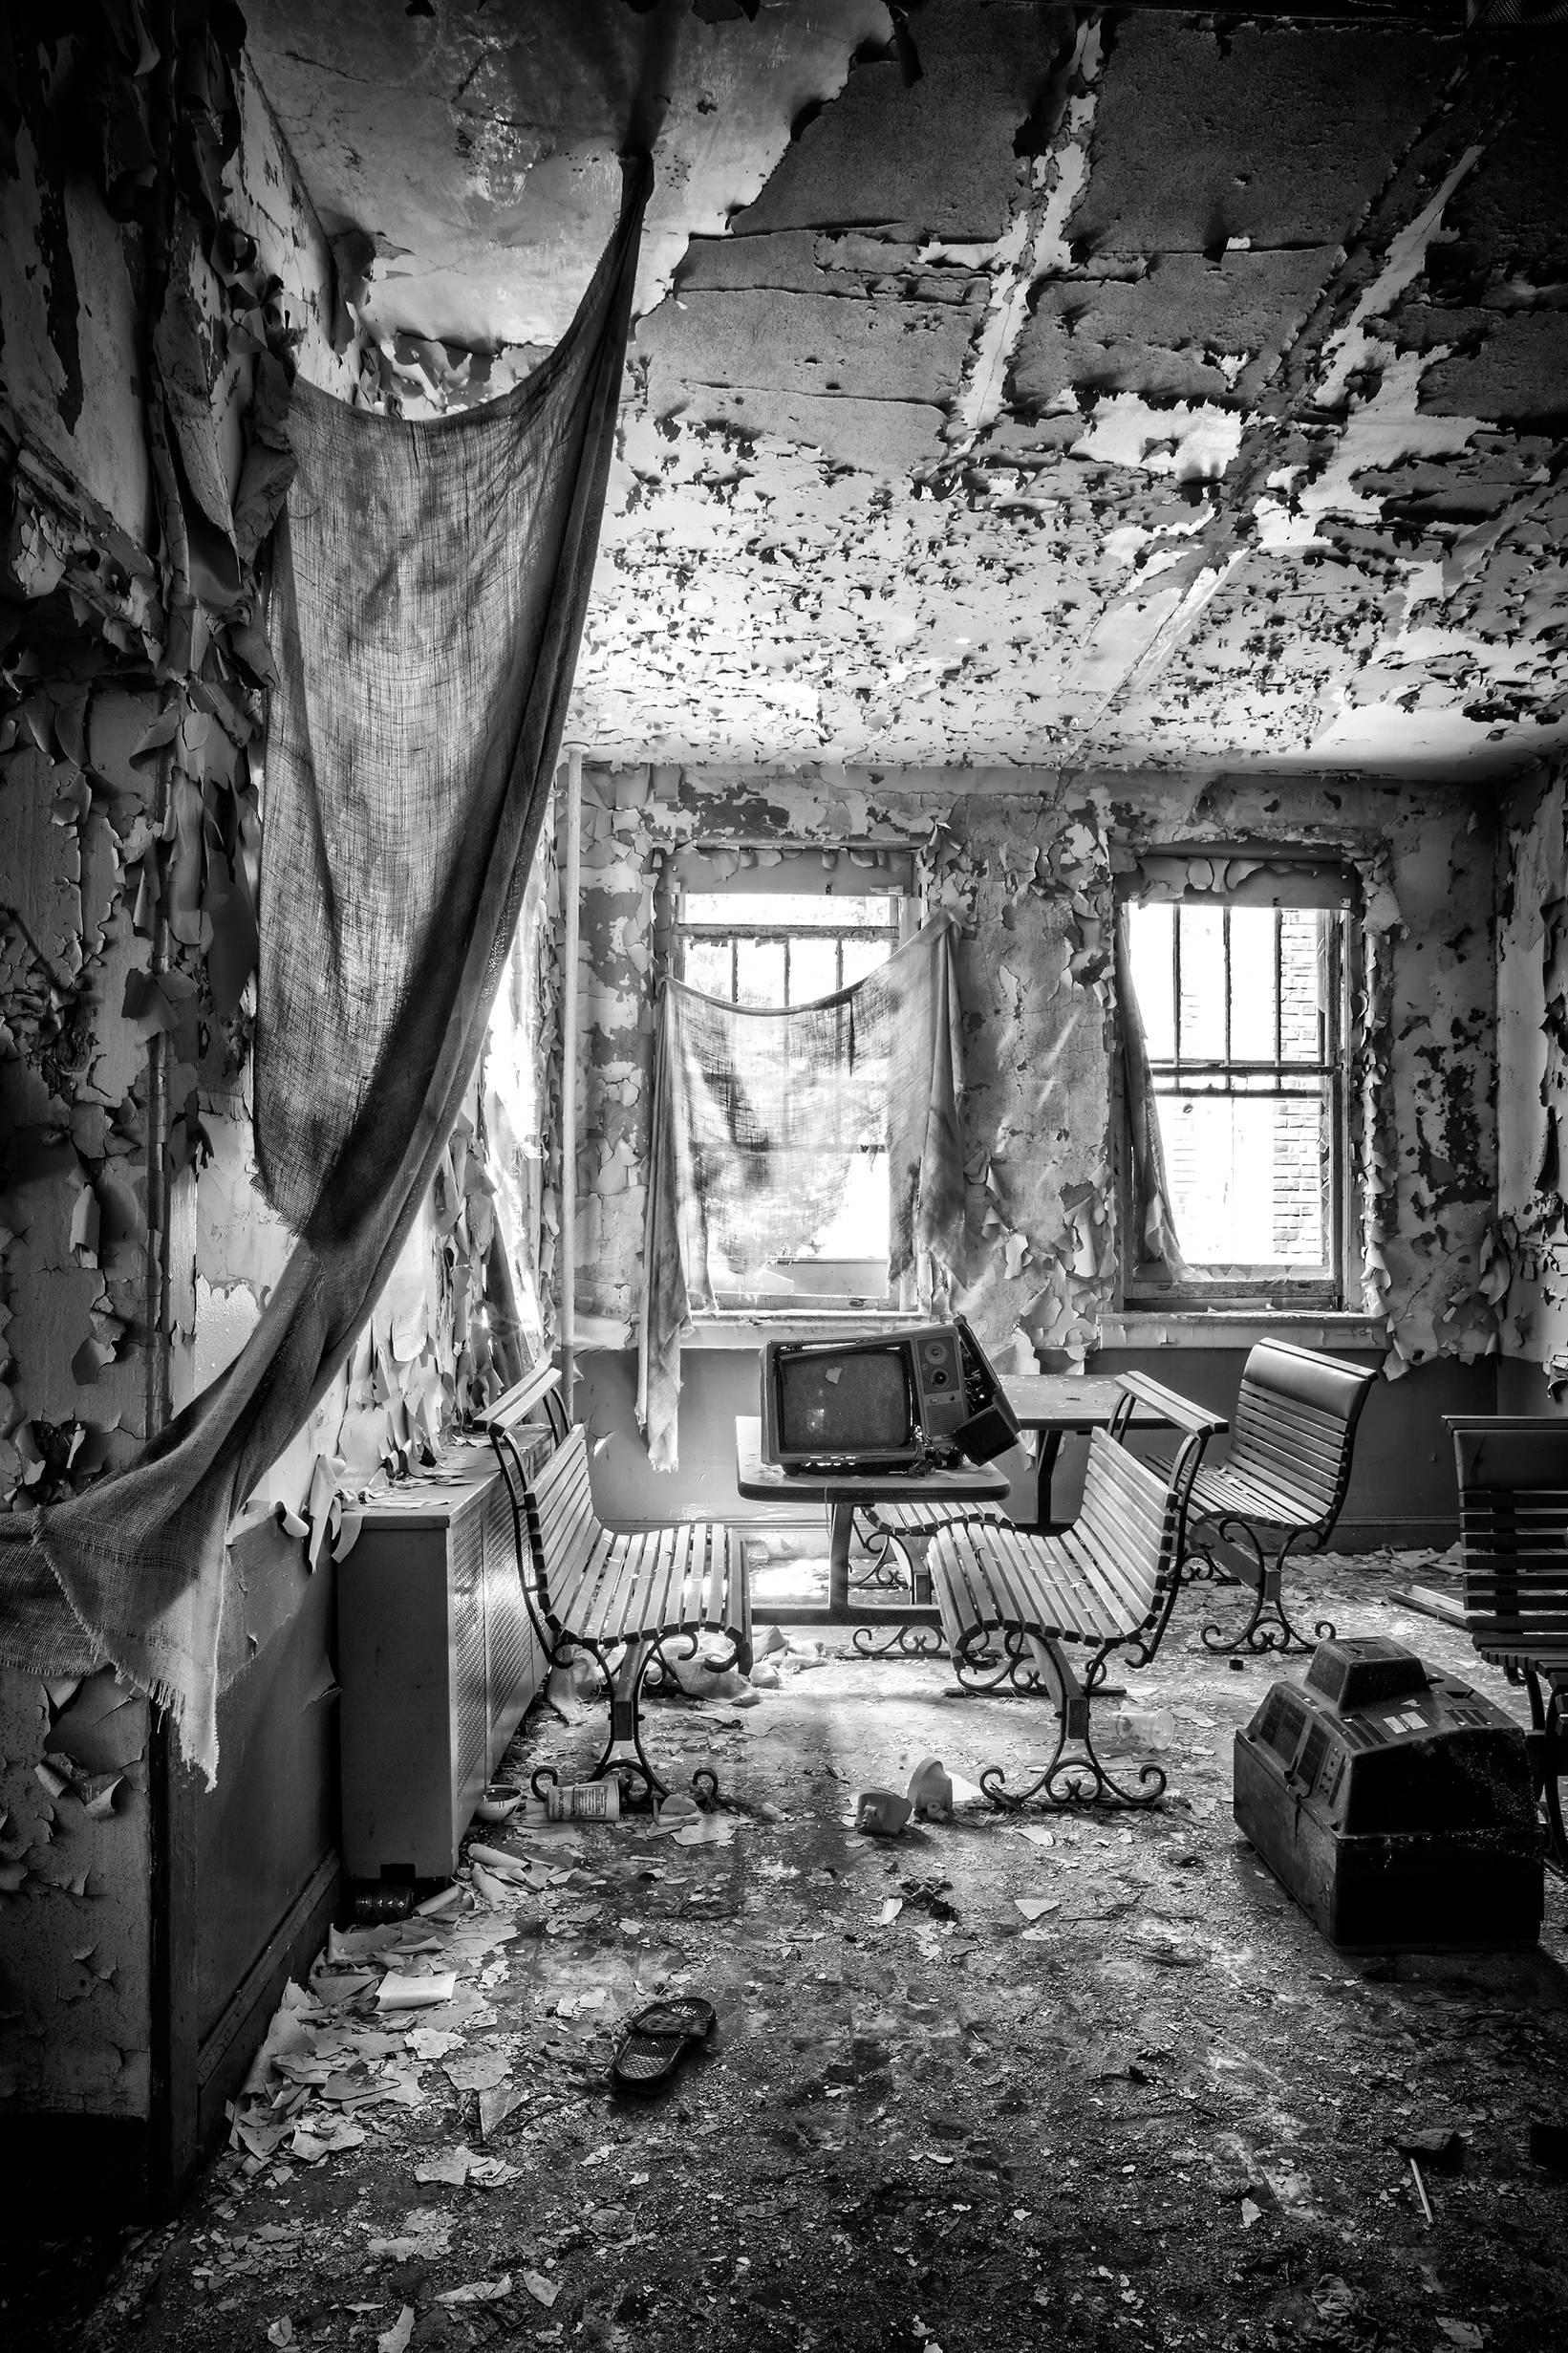 "Ruined", abandoned, metal print, black and white, TV, television, photograph - Photograph by Rebecca Skinner